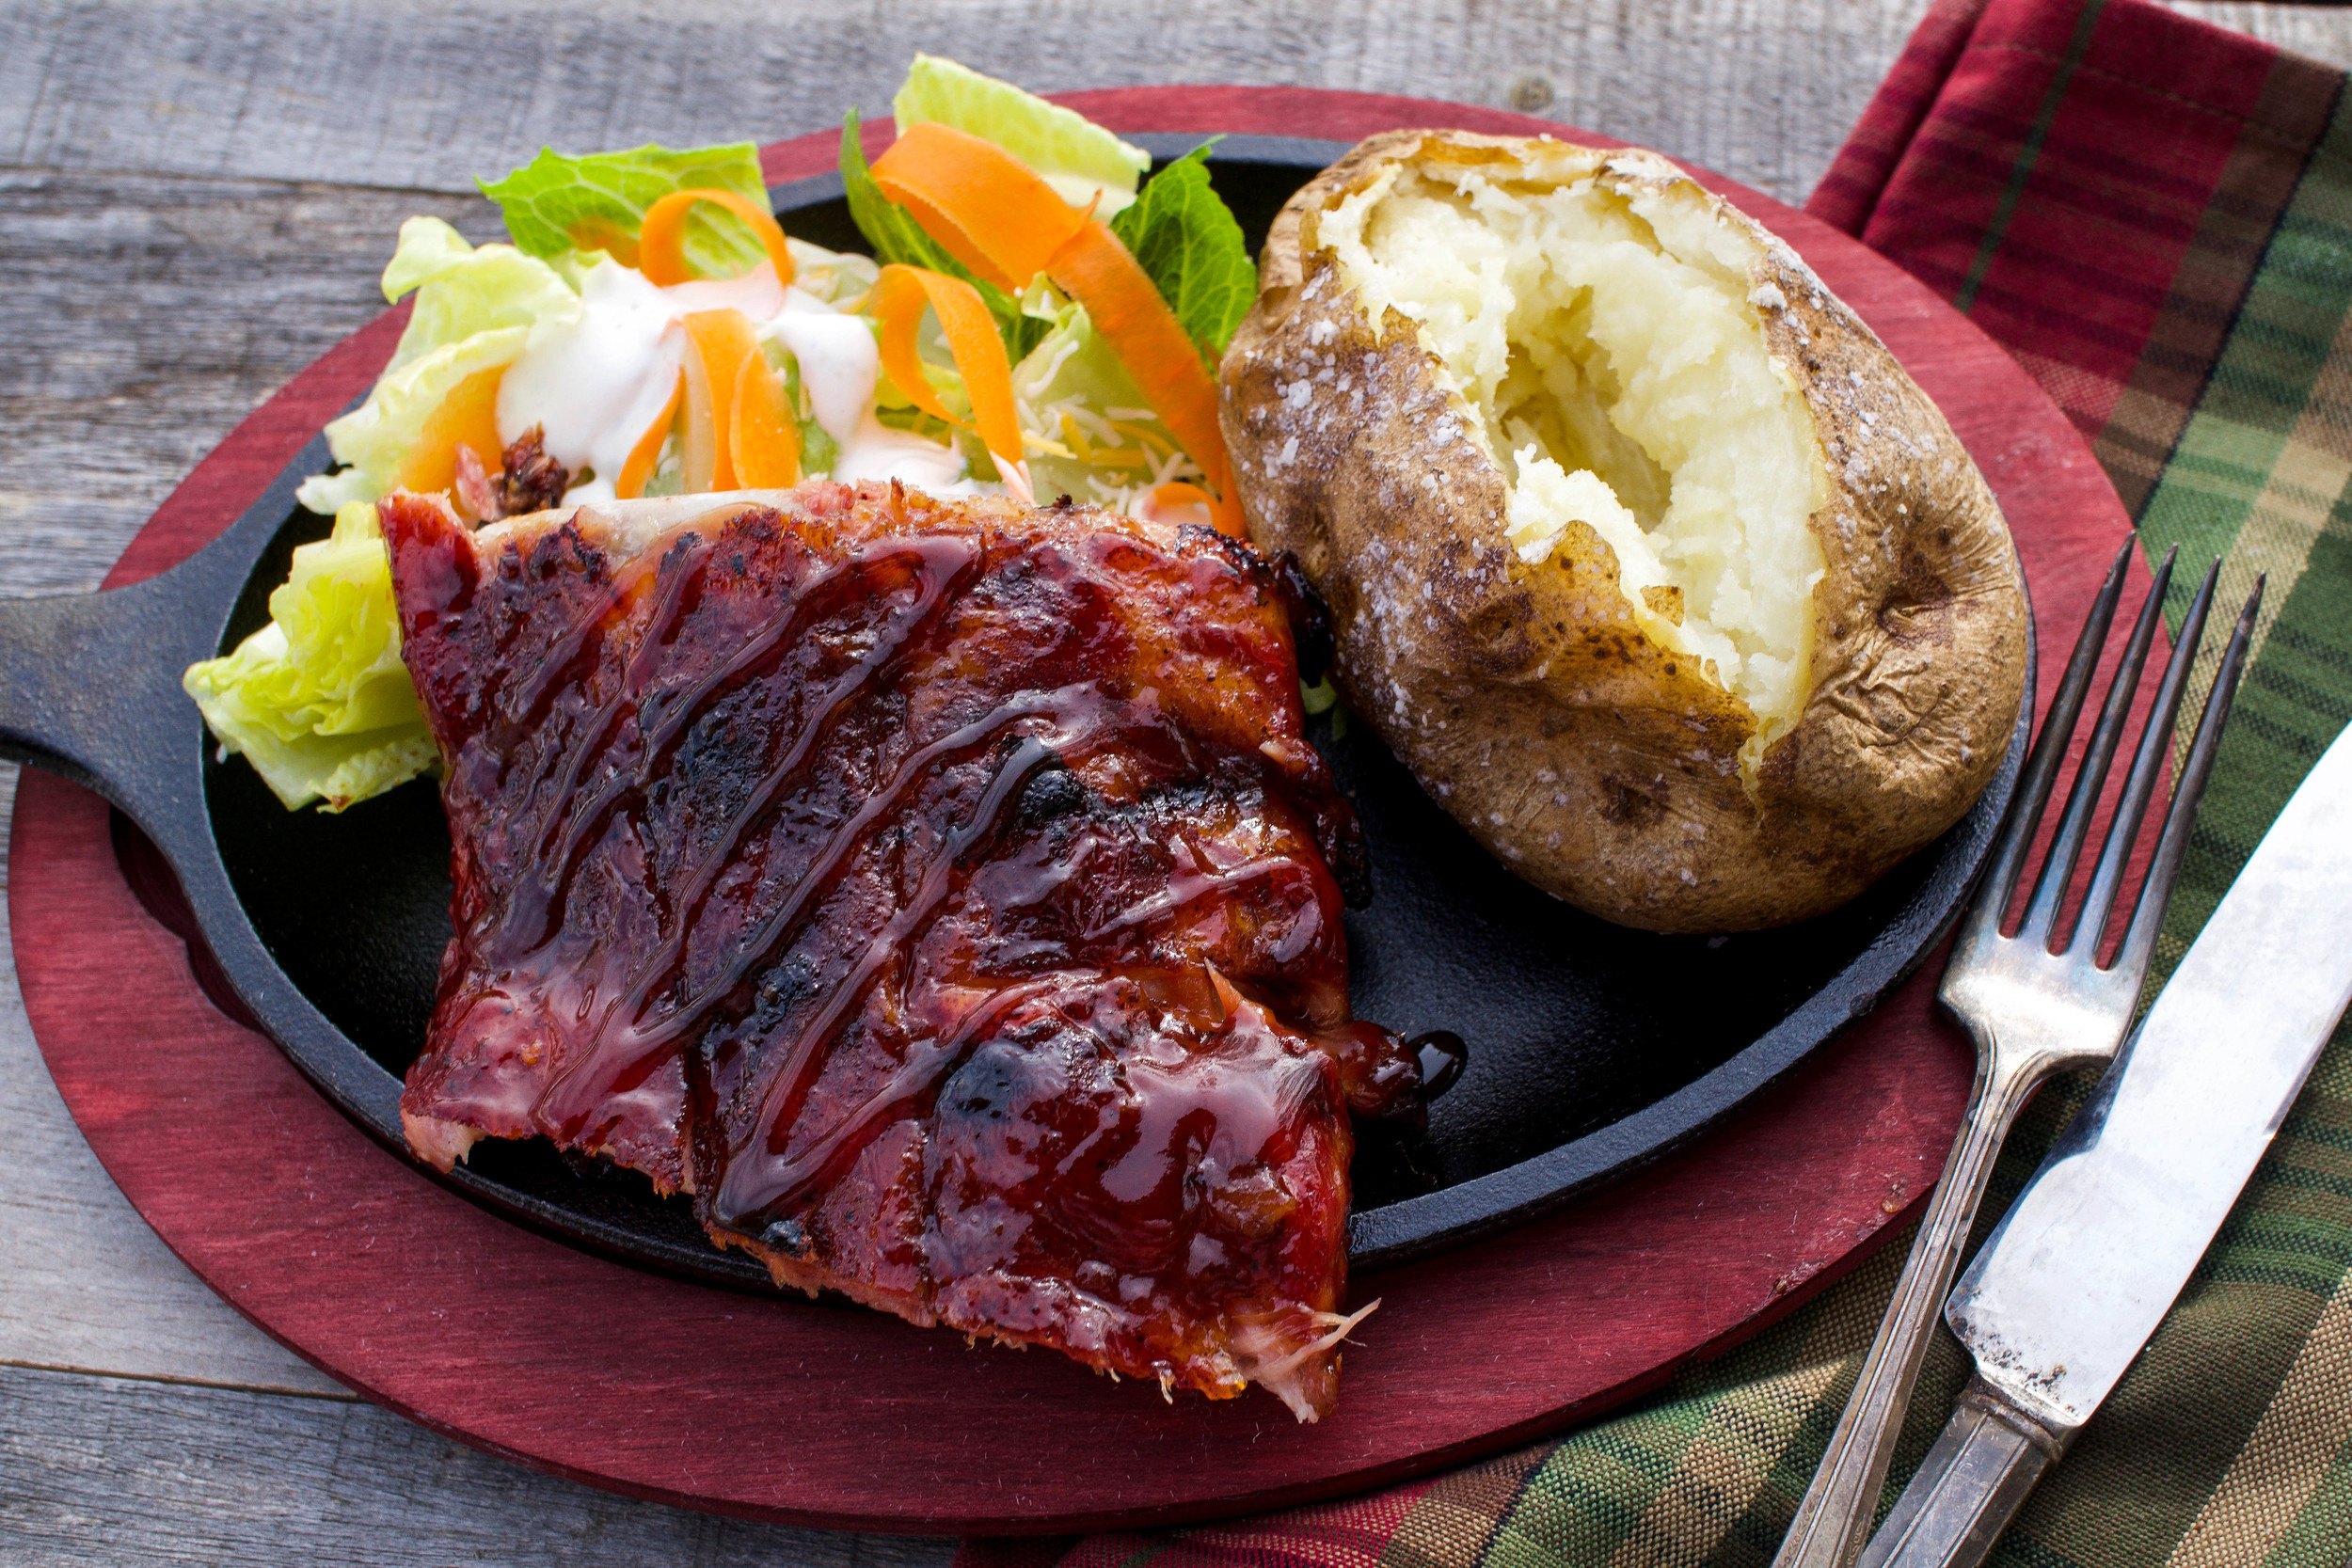 Homemade barbecue sauce with ribs